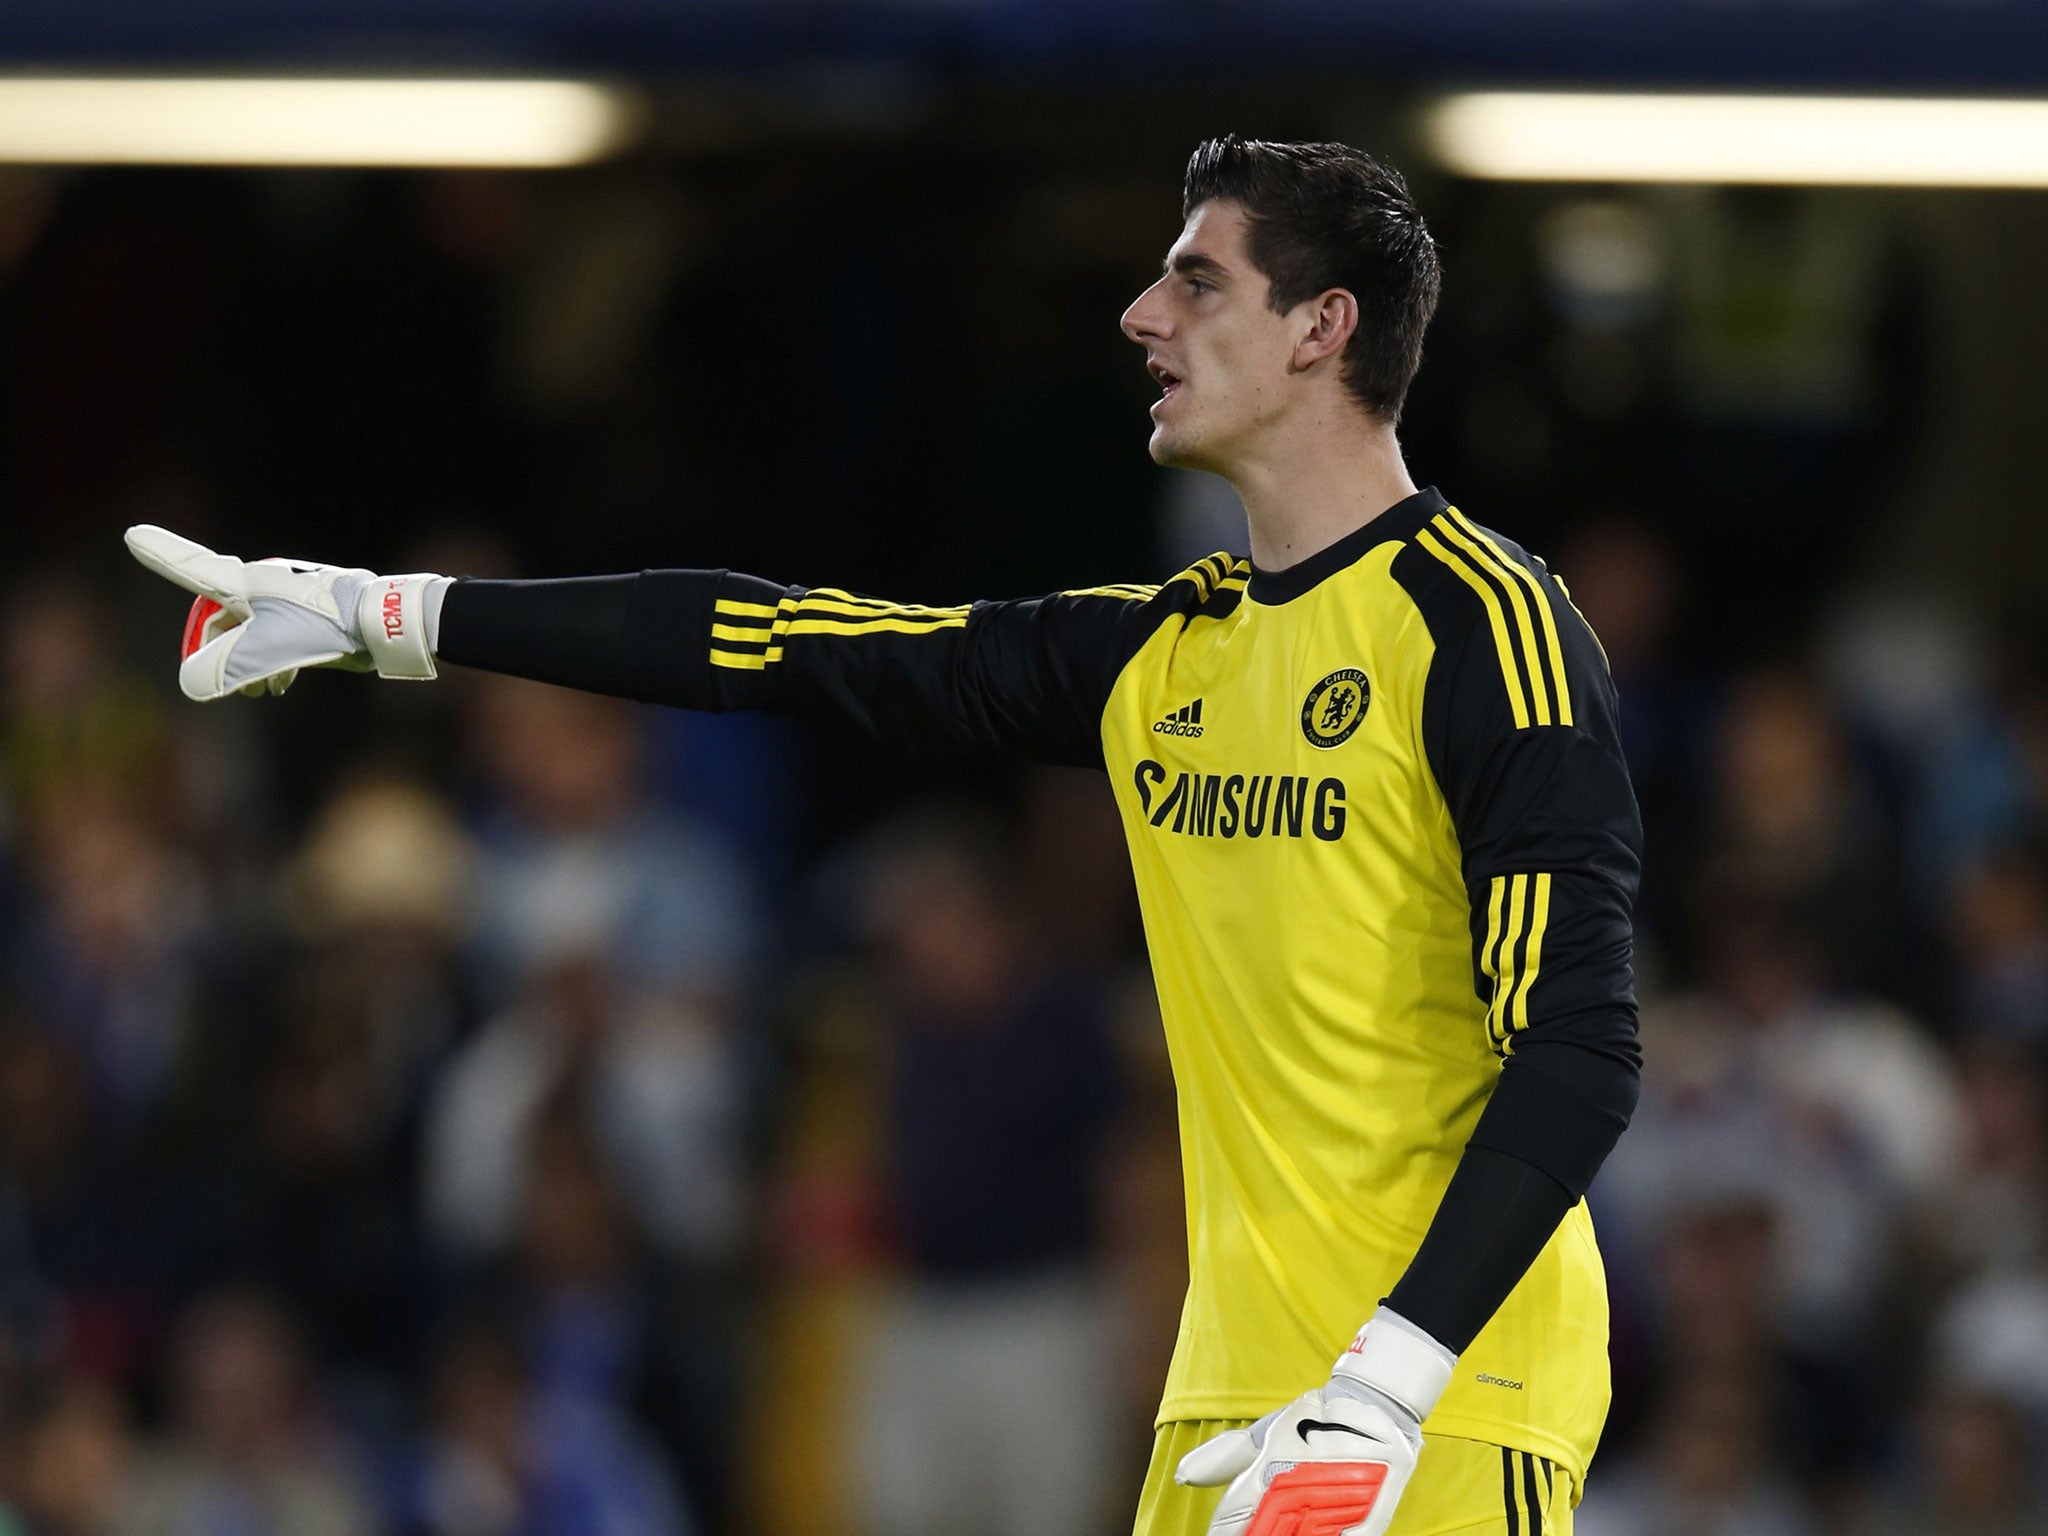 Thibaut Courtois played 90 minutes against Real Sociedad but Jose Mourinho will wait on No 1 choice